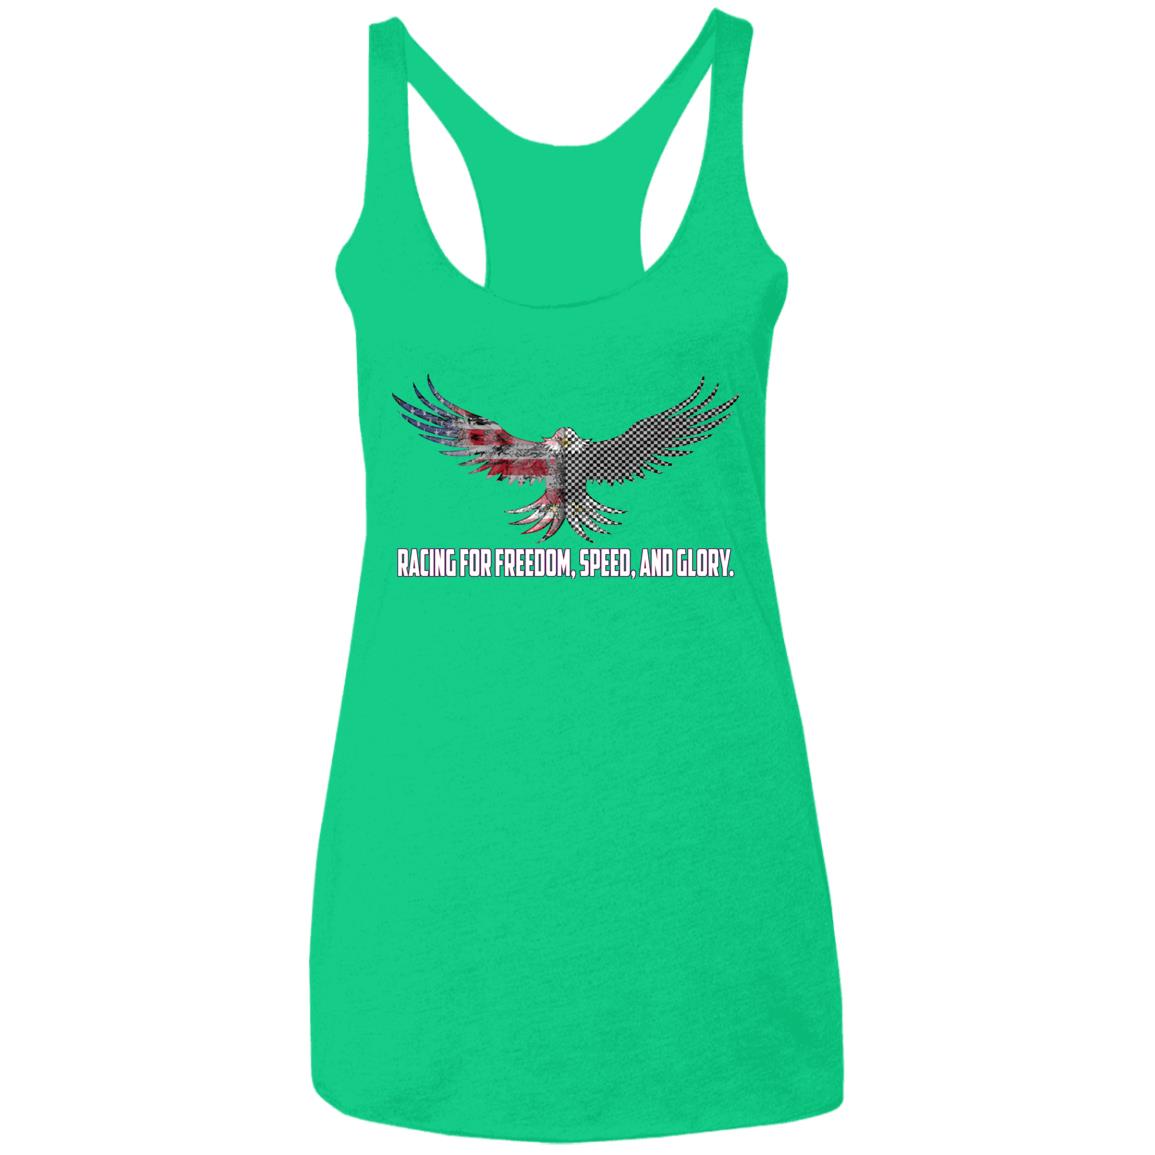 Racing For Freedom, Speed, And Glory Ladies' Triblend Racerback Tank